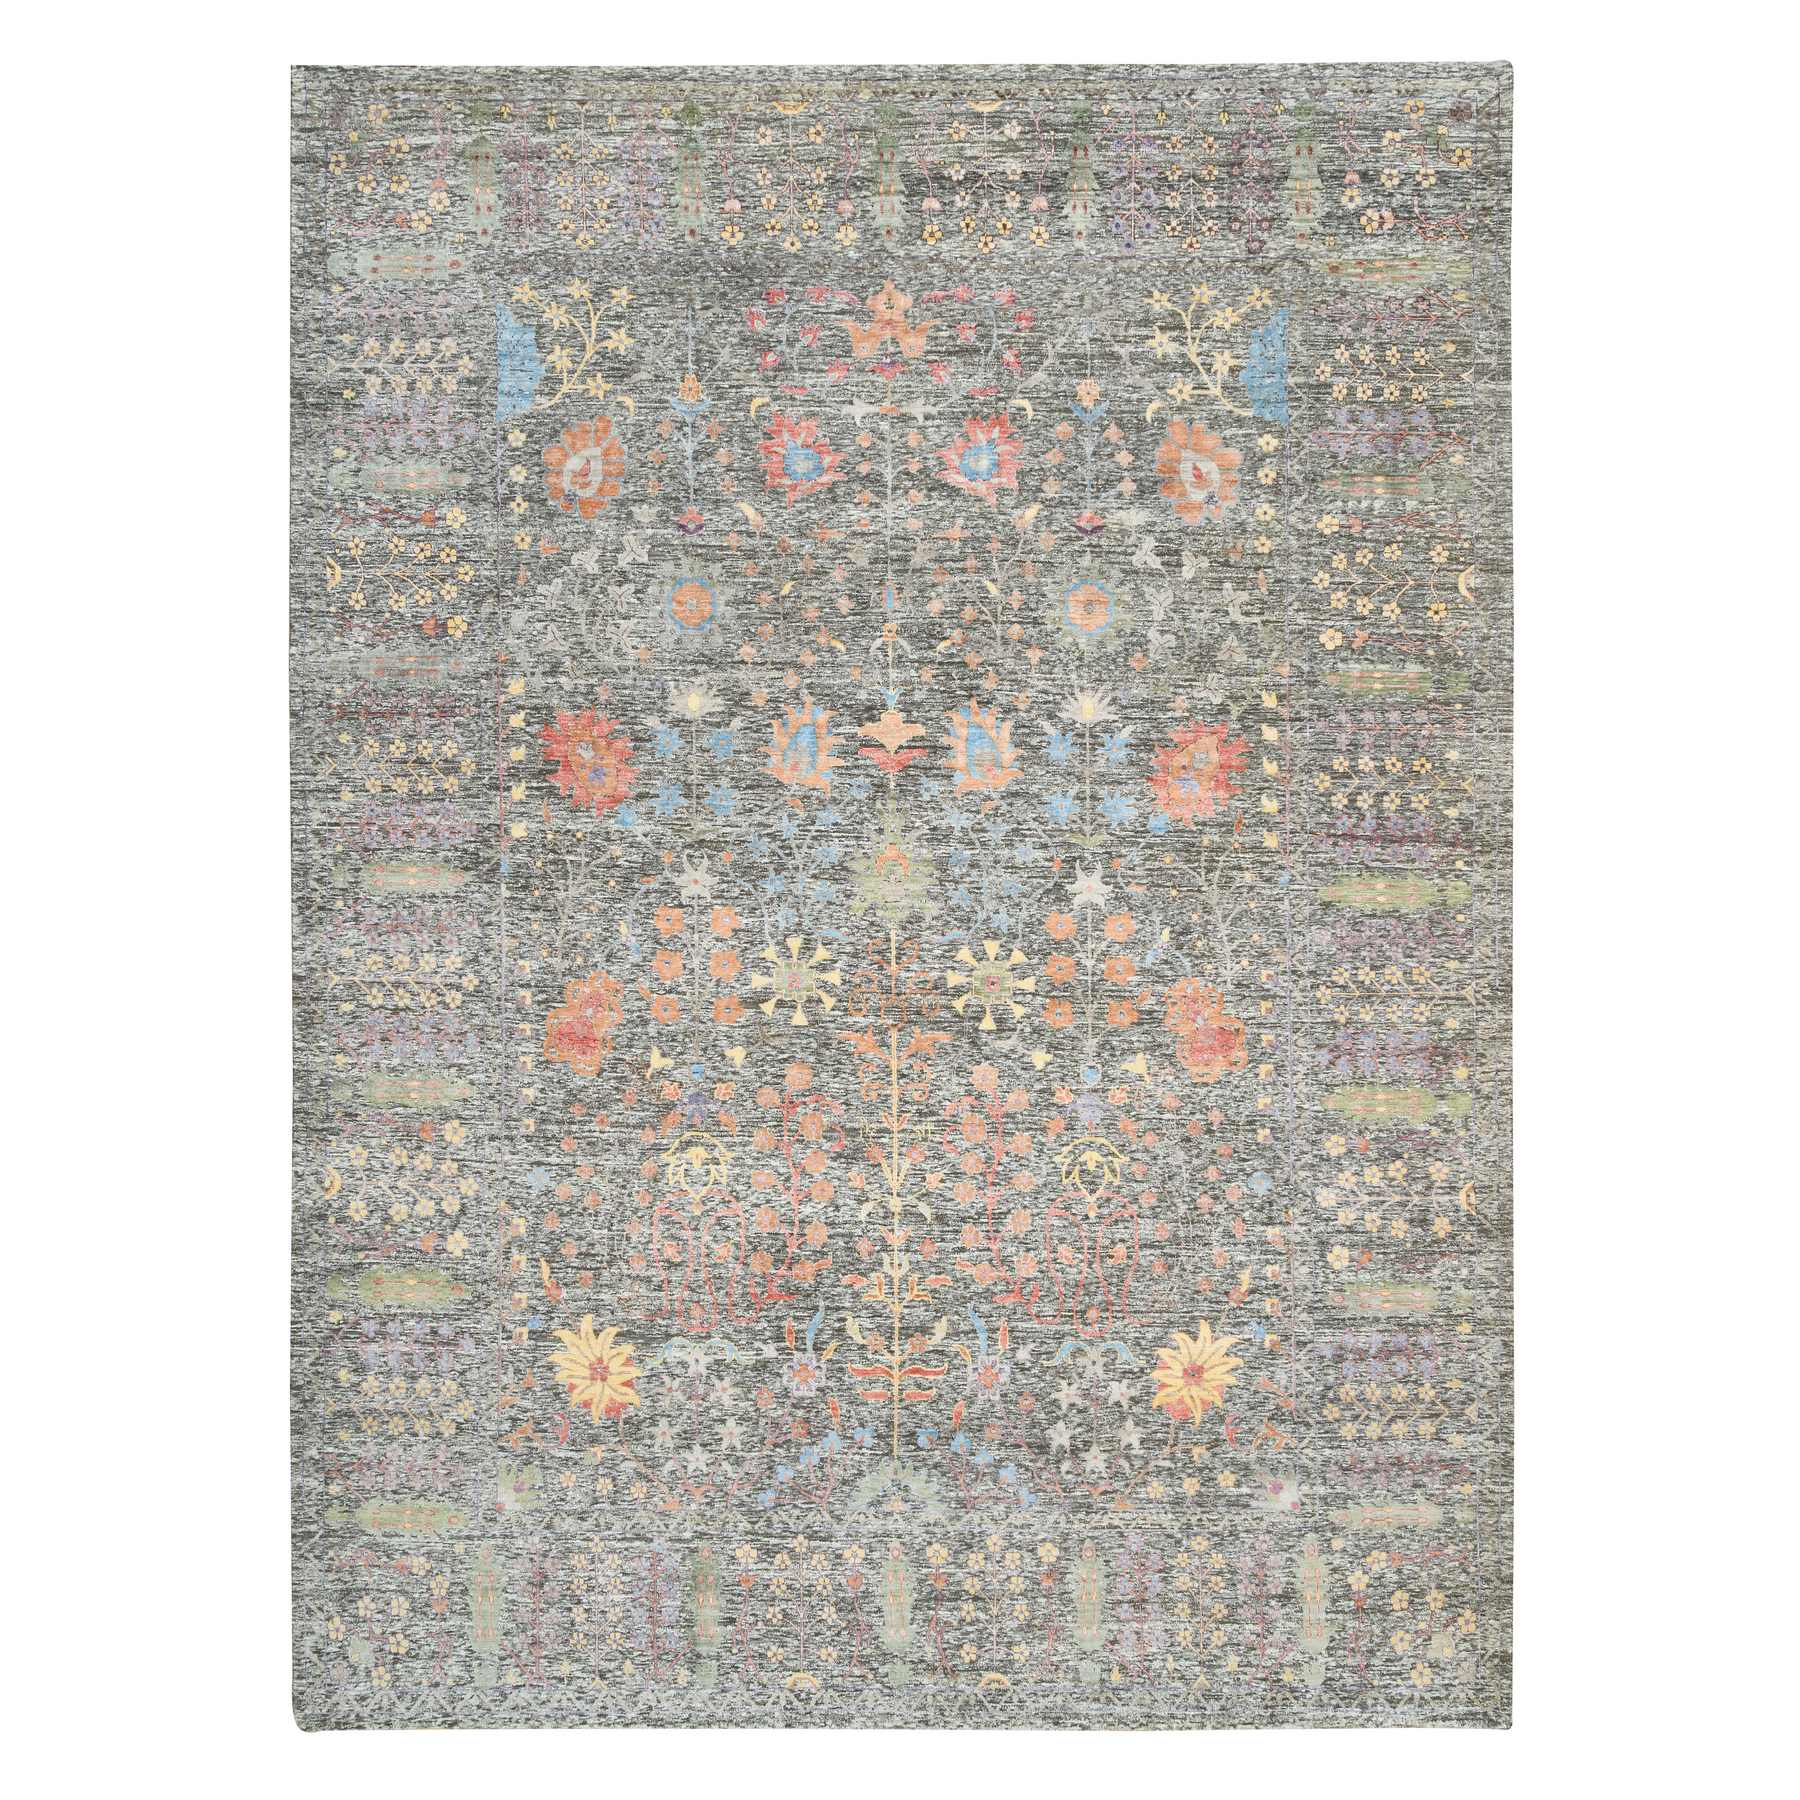  Silk Hand-Knotted Area Rug 9'1